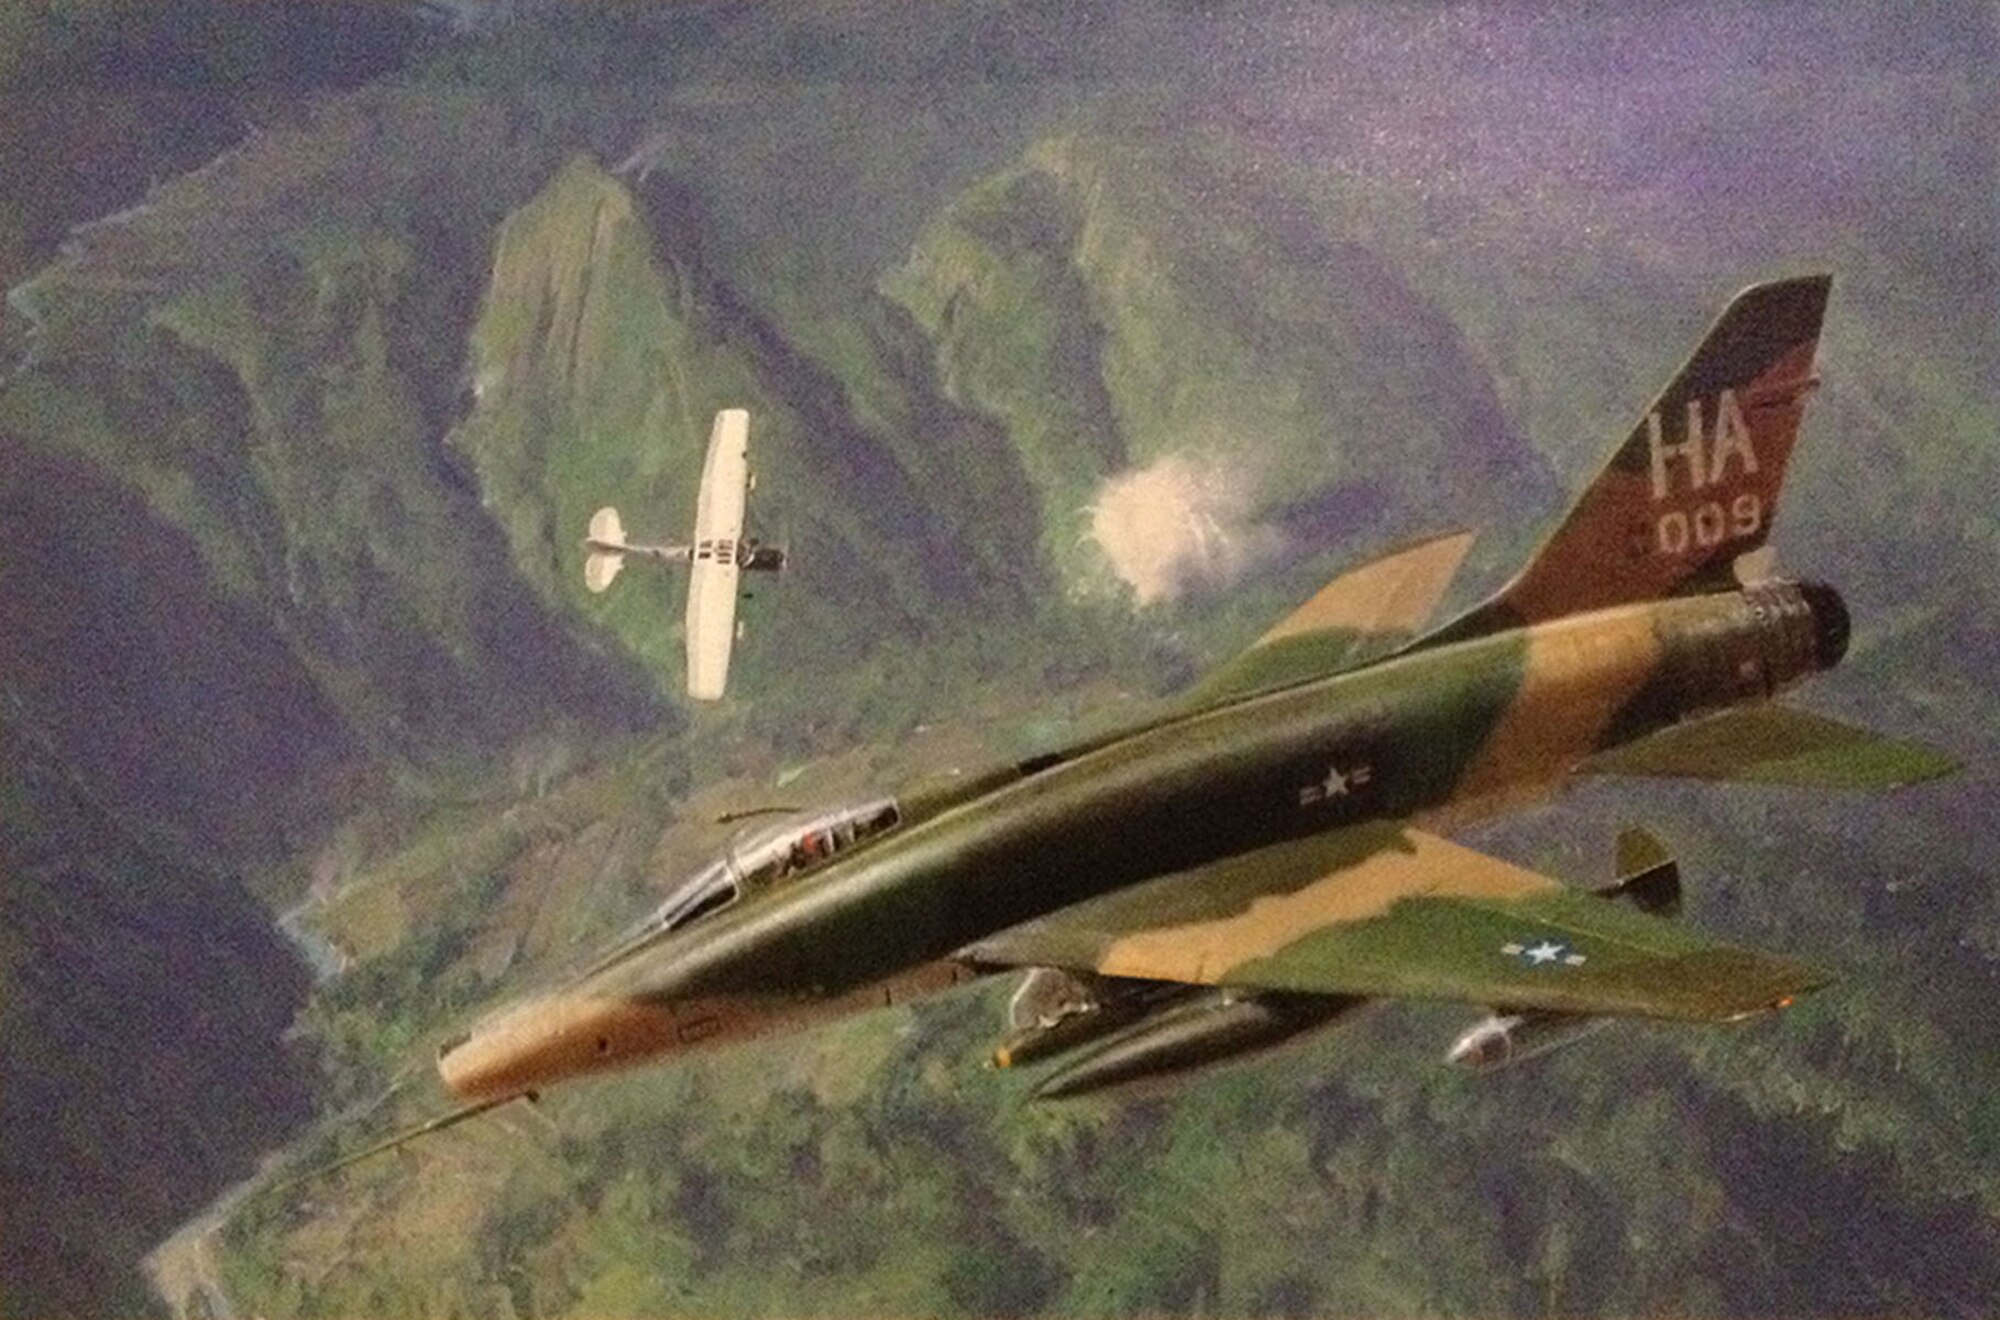 " Painting the FACs in Action" by Wilson Hurley on display in Kettering Hall at the National Museum of the U.S. Air Force.Wilson Hurley. (U.S. Air Force photo).